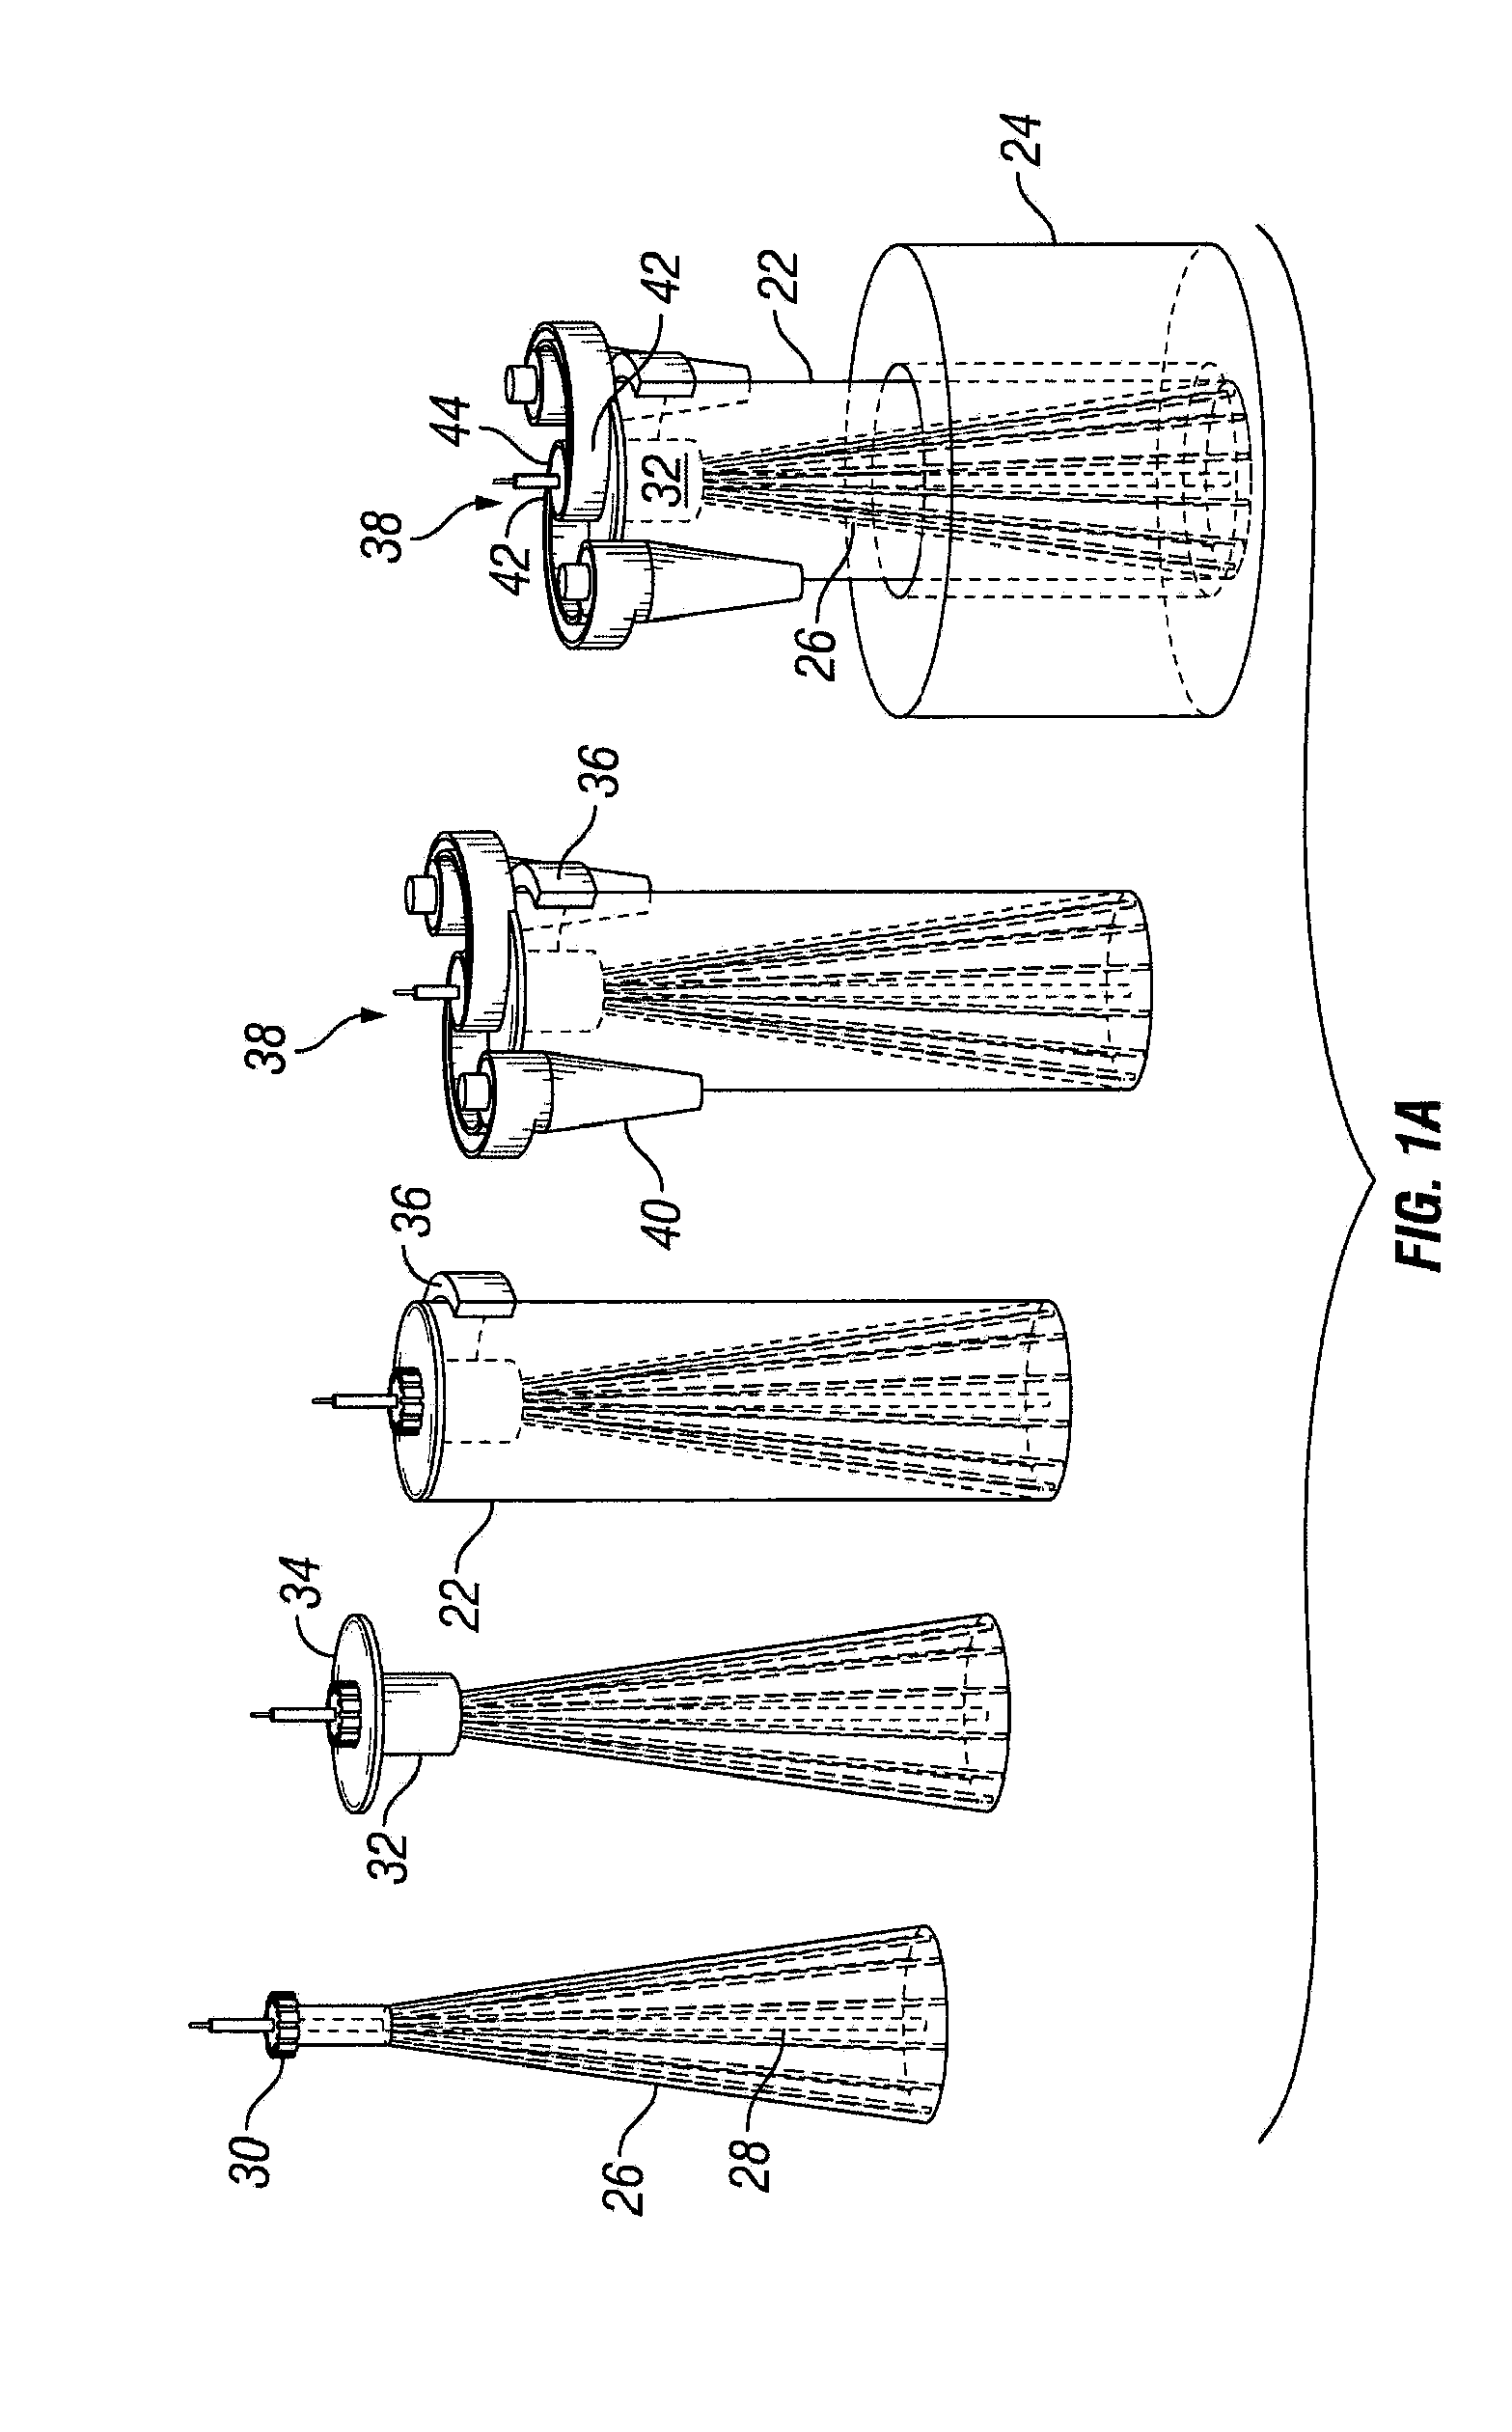 Apparatus and method for density separator for drilling fluid